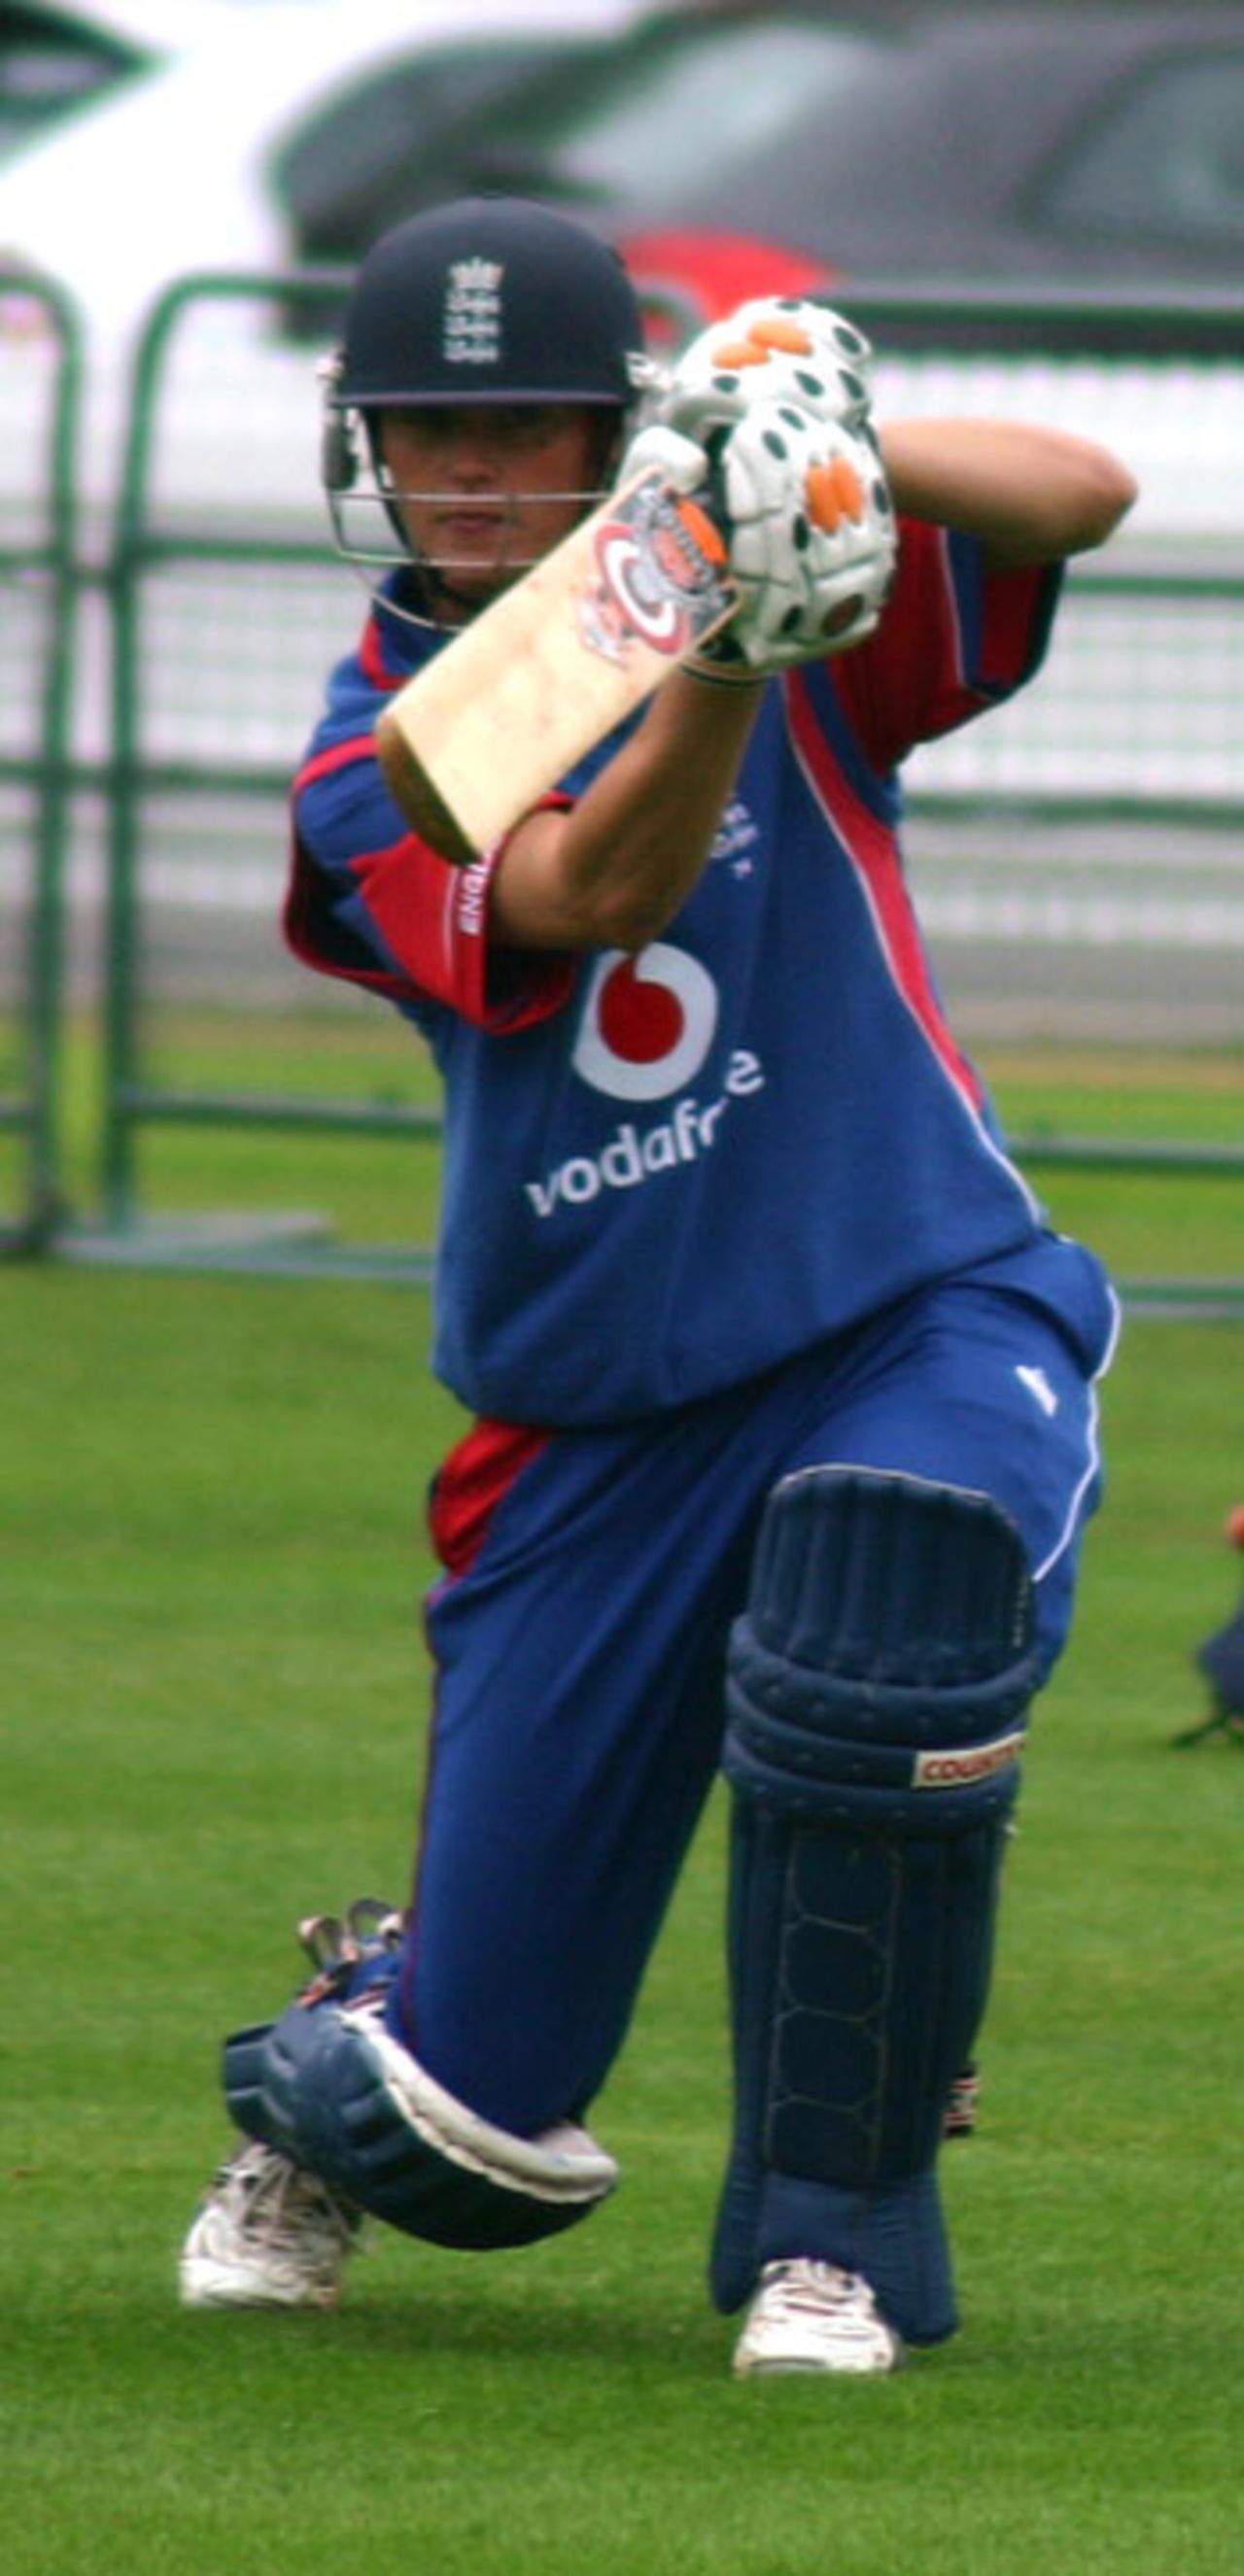 Laura Newton drives firmly during a net session, England Women v India Women, 1st ODI, Lord's, August 14, 2006